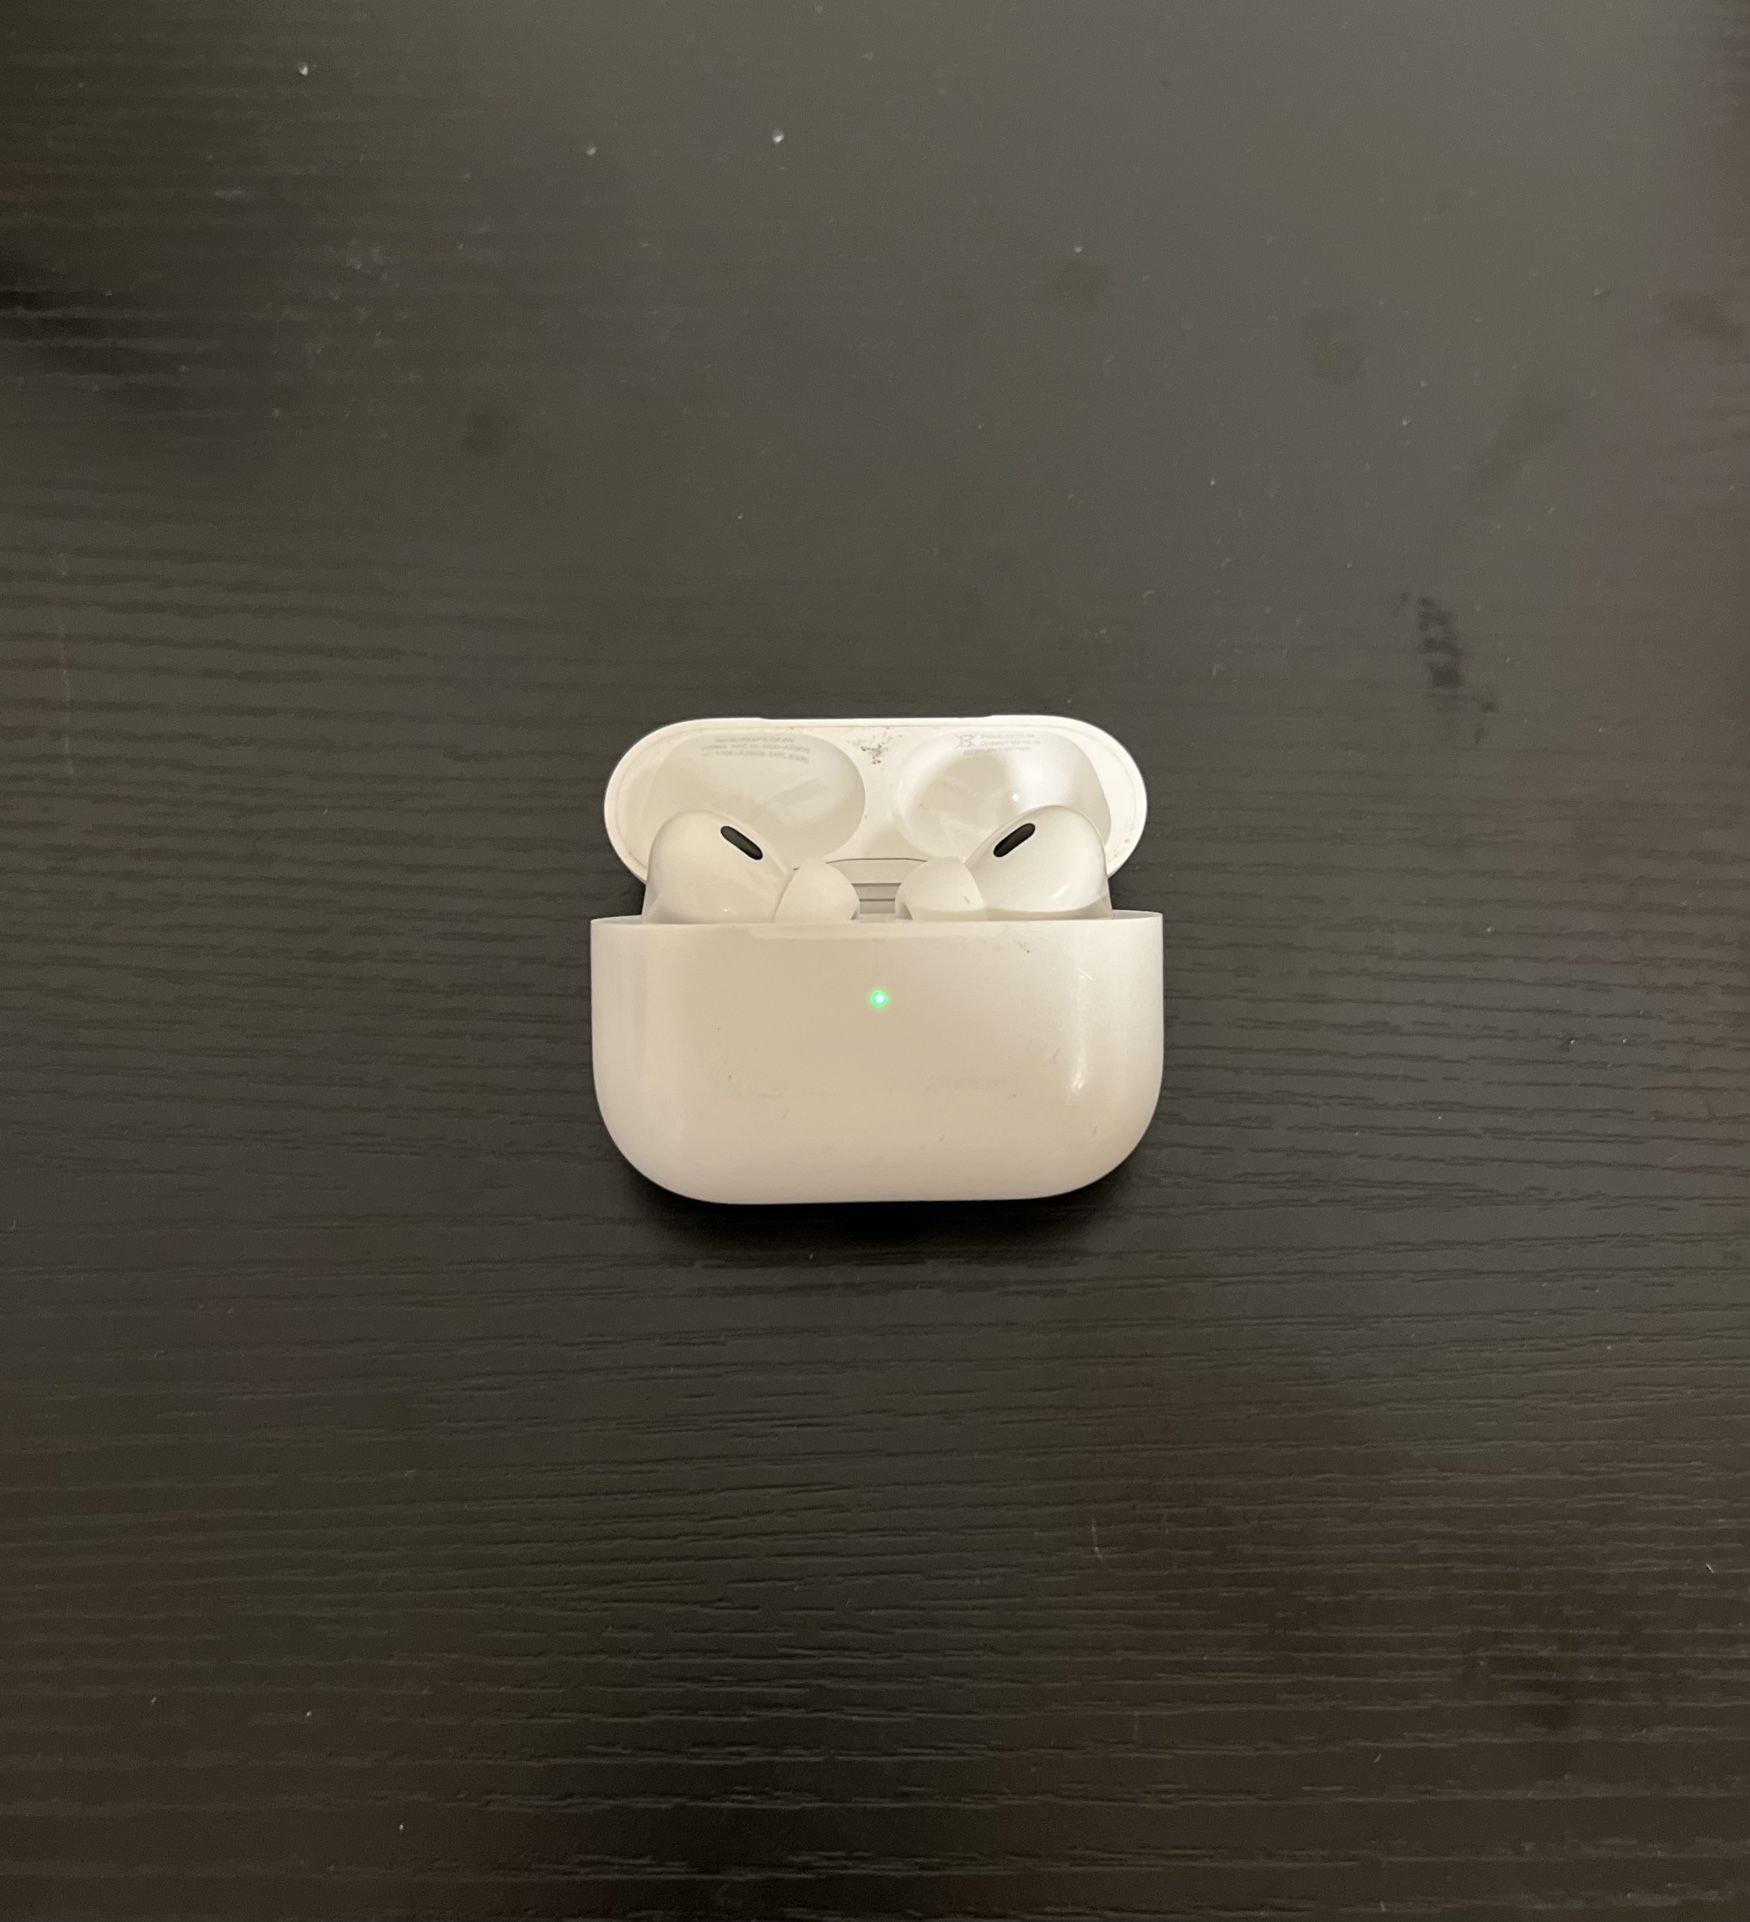 Air pods pro 2nd generation (newest one)